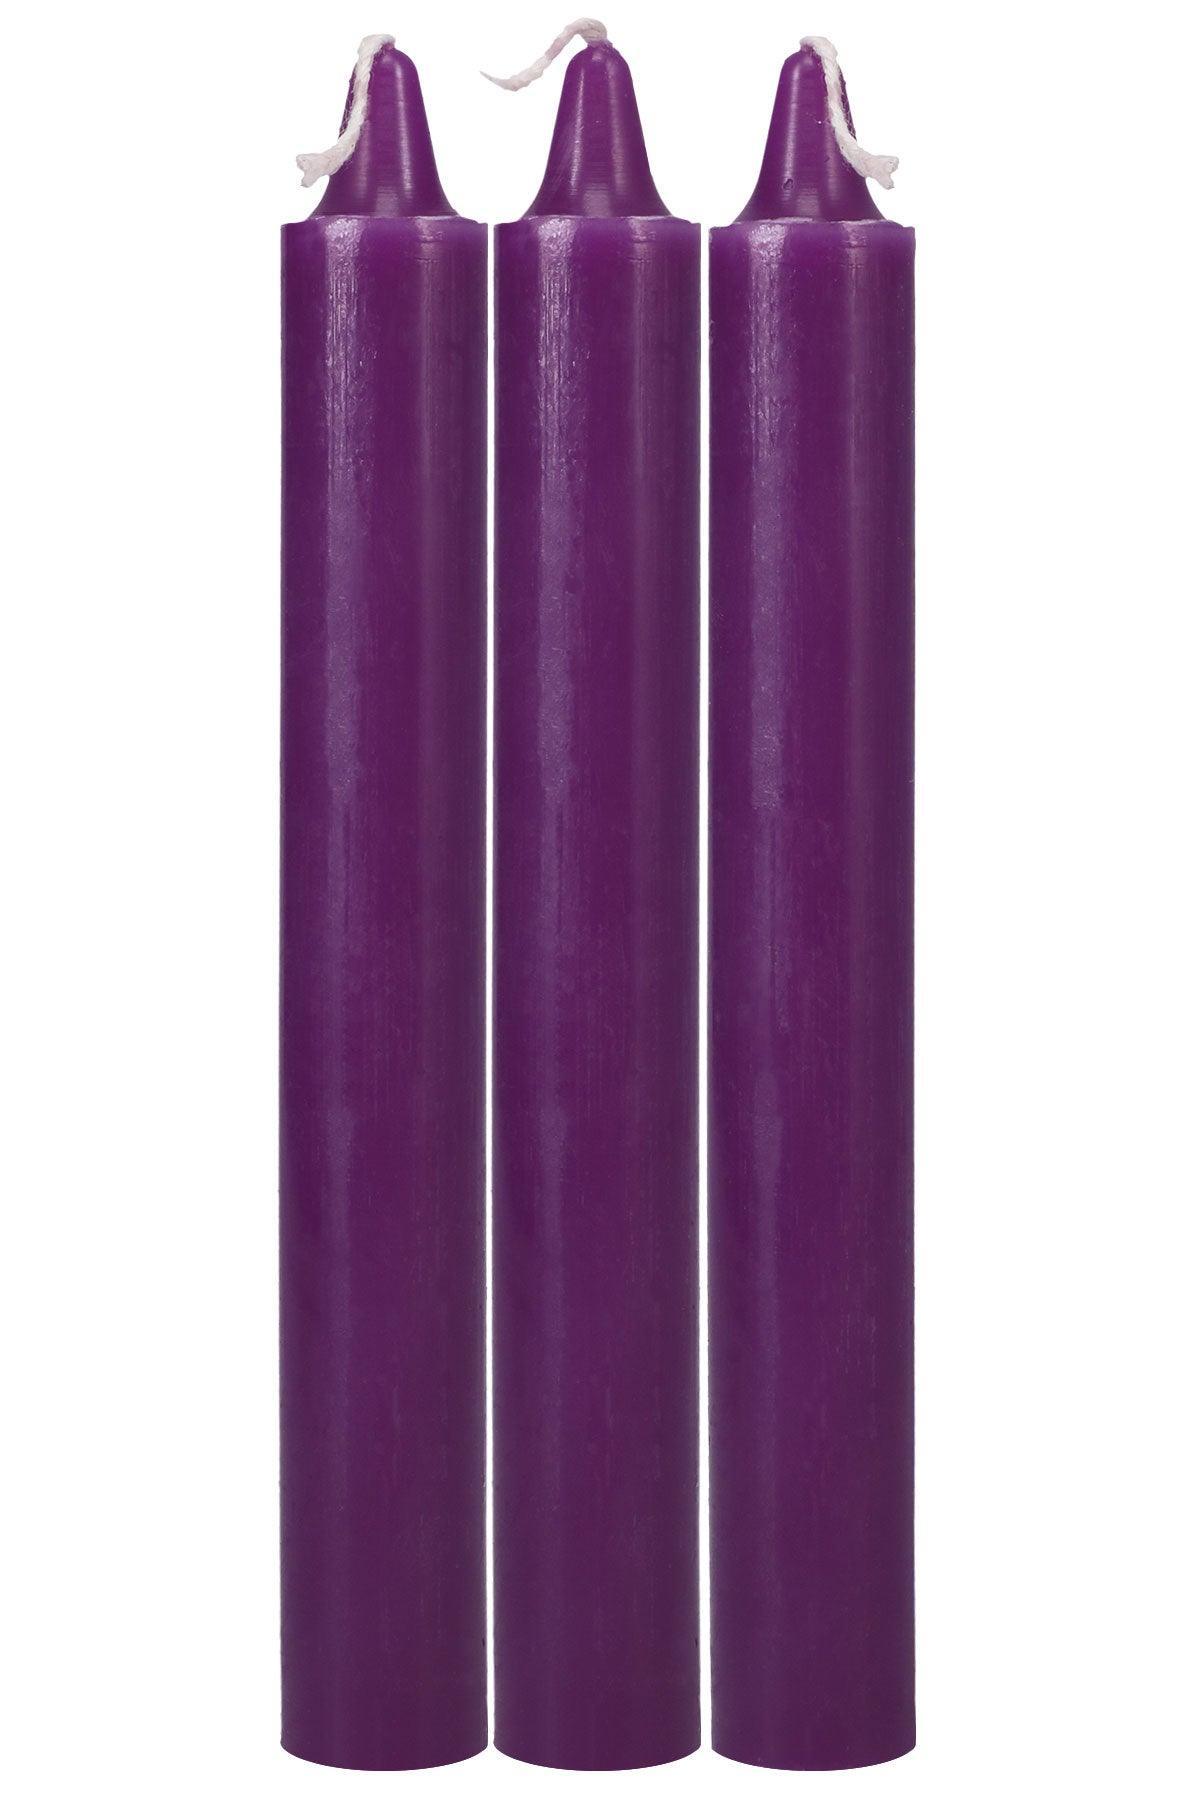 Japanese Drip Candles - 3 Pack - Purple - My Sex Toy Hub